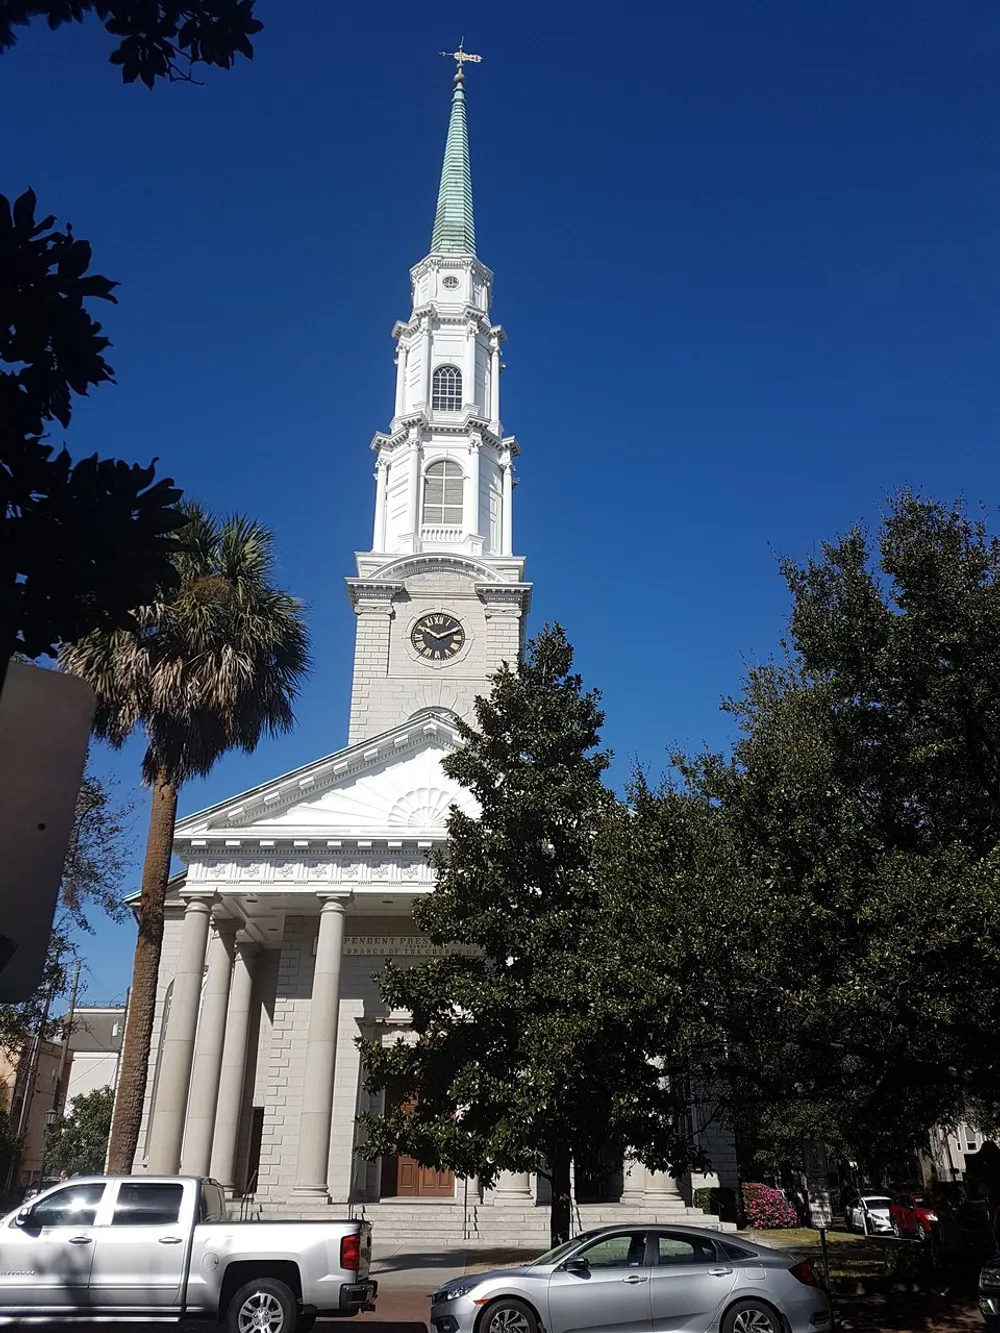 The image shows a tall white church with a steeple and clock under a clear blue sky partially obscured by trees with parked cars along the street in the foreground